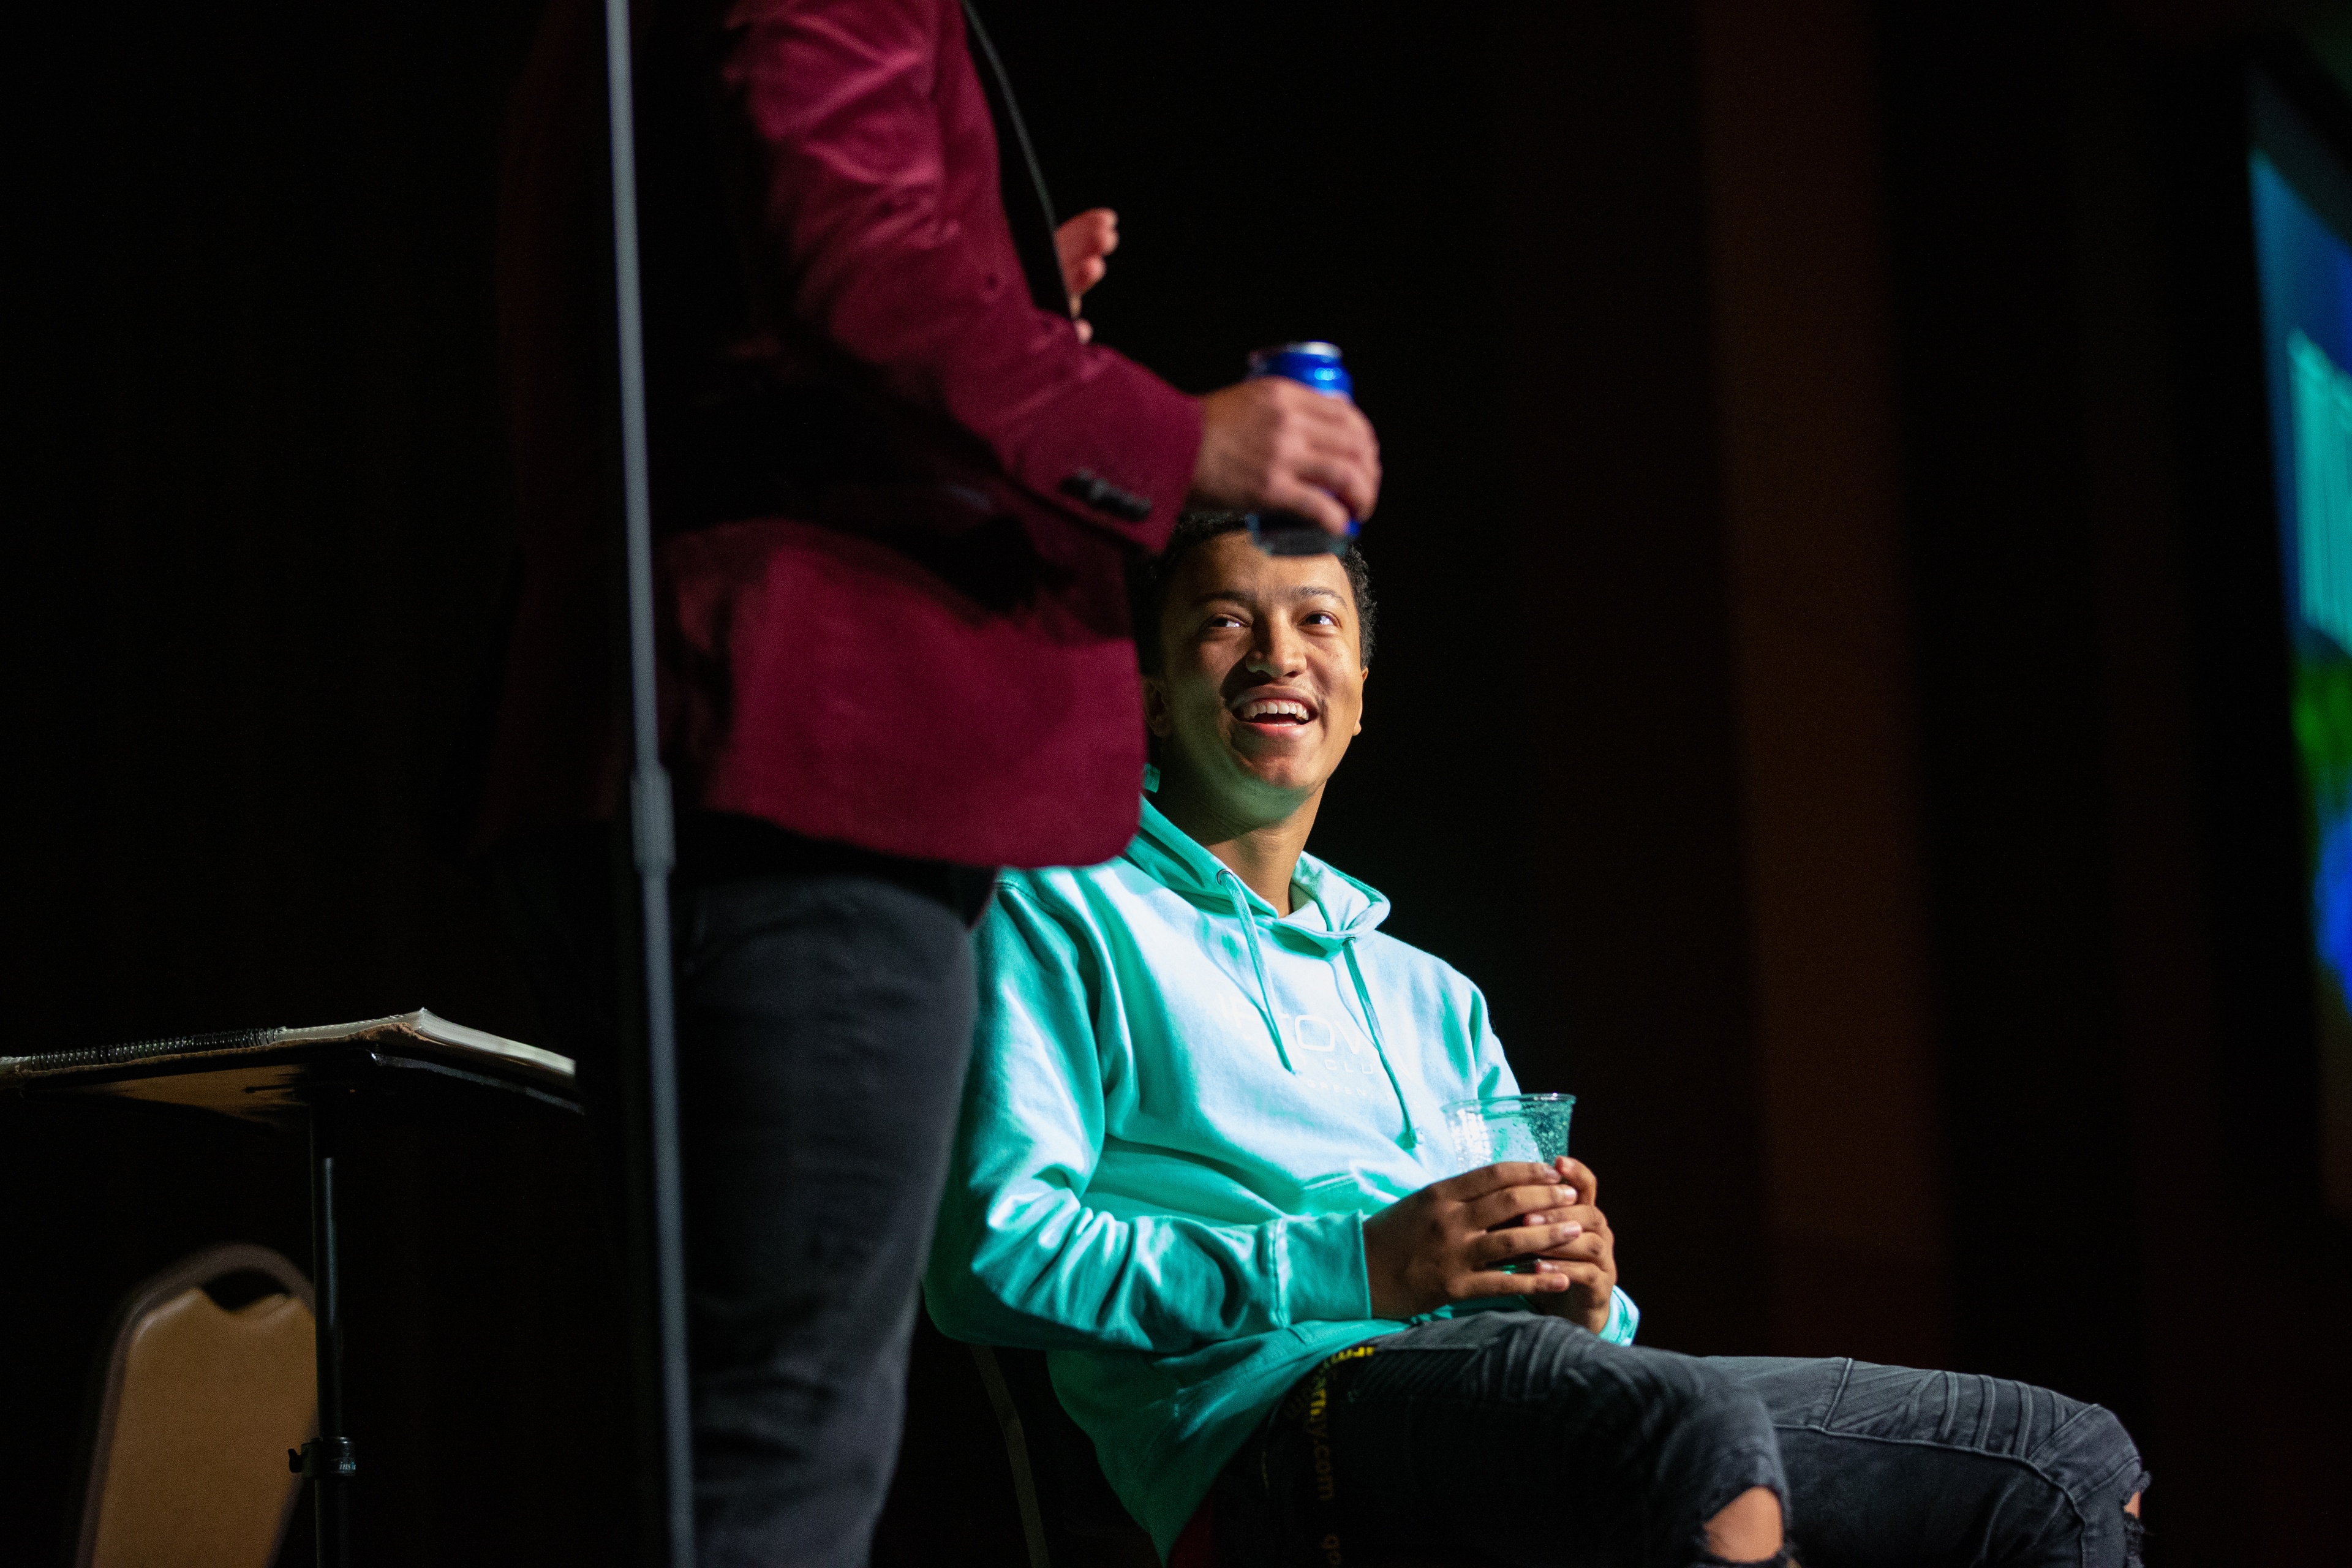 A young man on stage with a magician